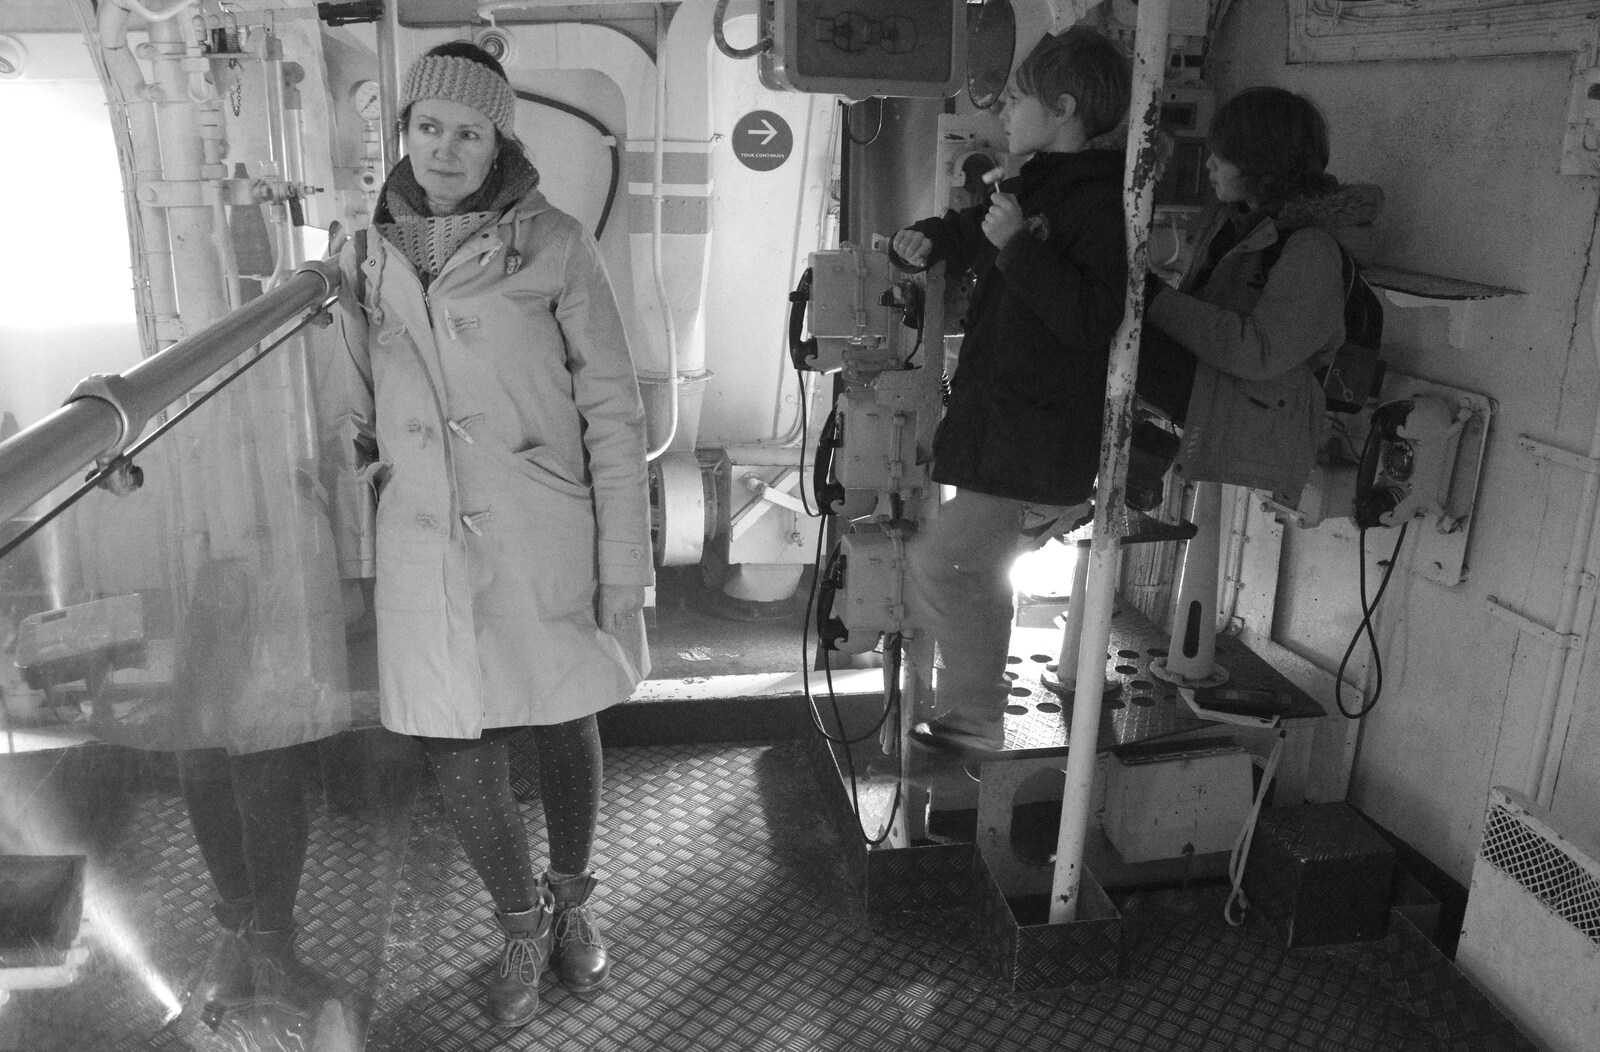 Isobel waits in the Turret Experience from HMS Belfast and the South Bank, Southwark, London - 17th February 2020